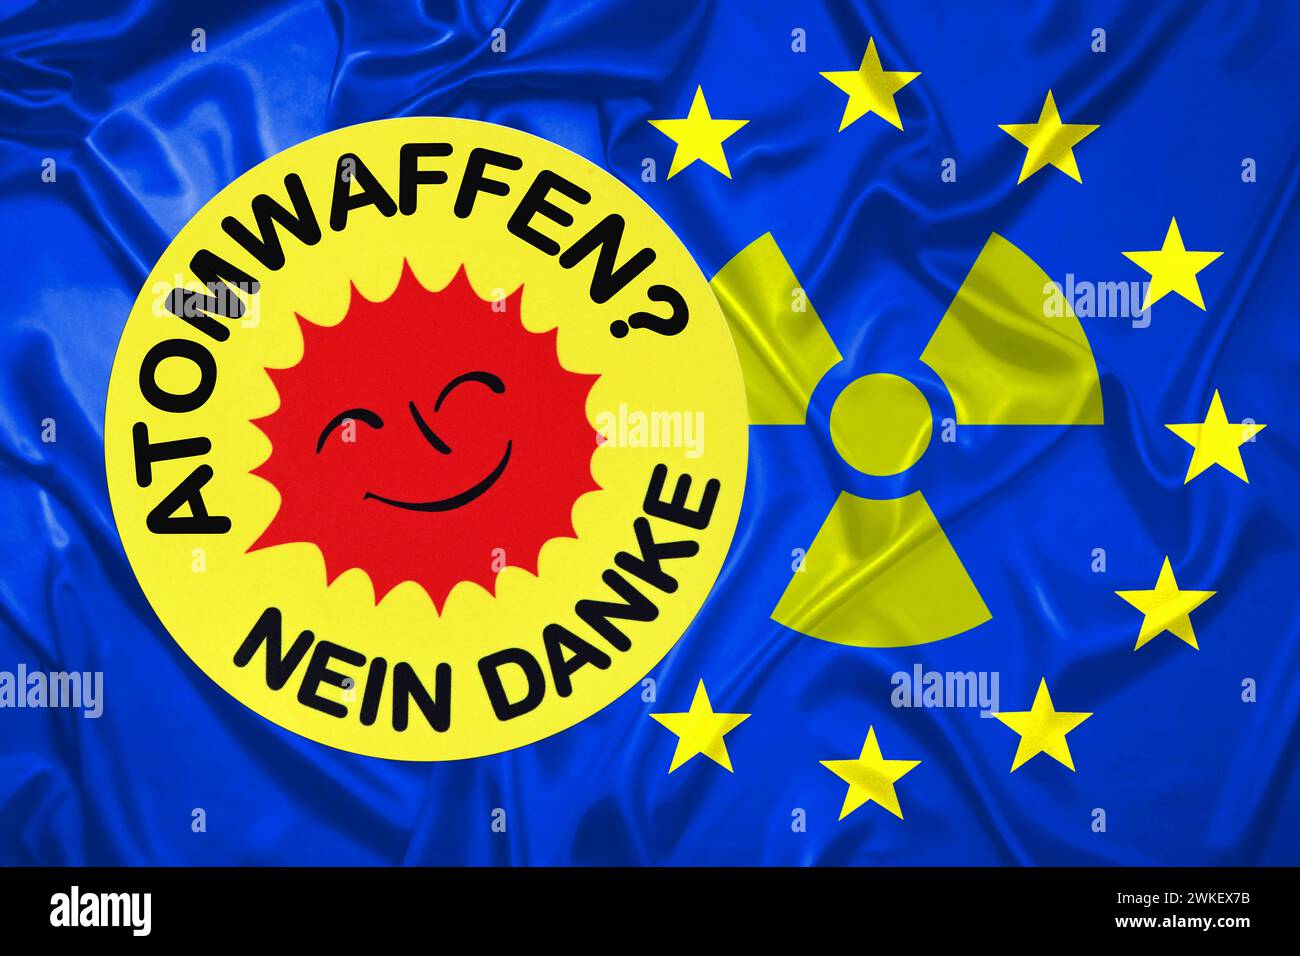 Nuclear Weapons Sticker? - No Thanks On EU Flag With Radioactivity Sign, Photomontage Stock Photo